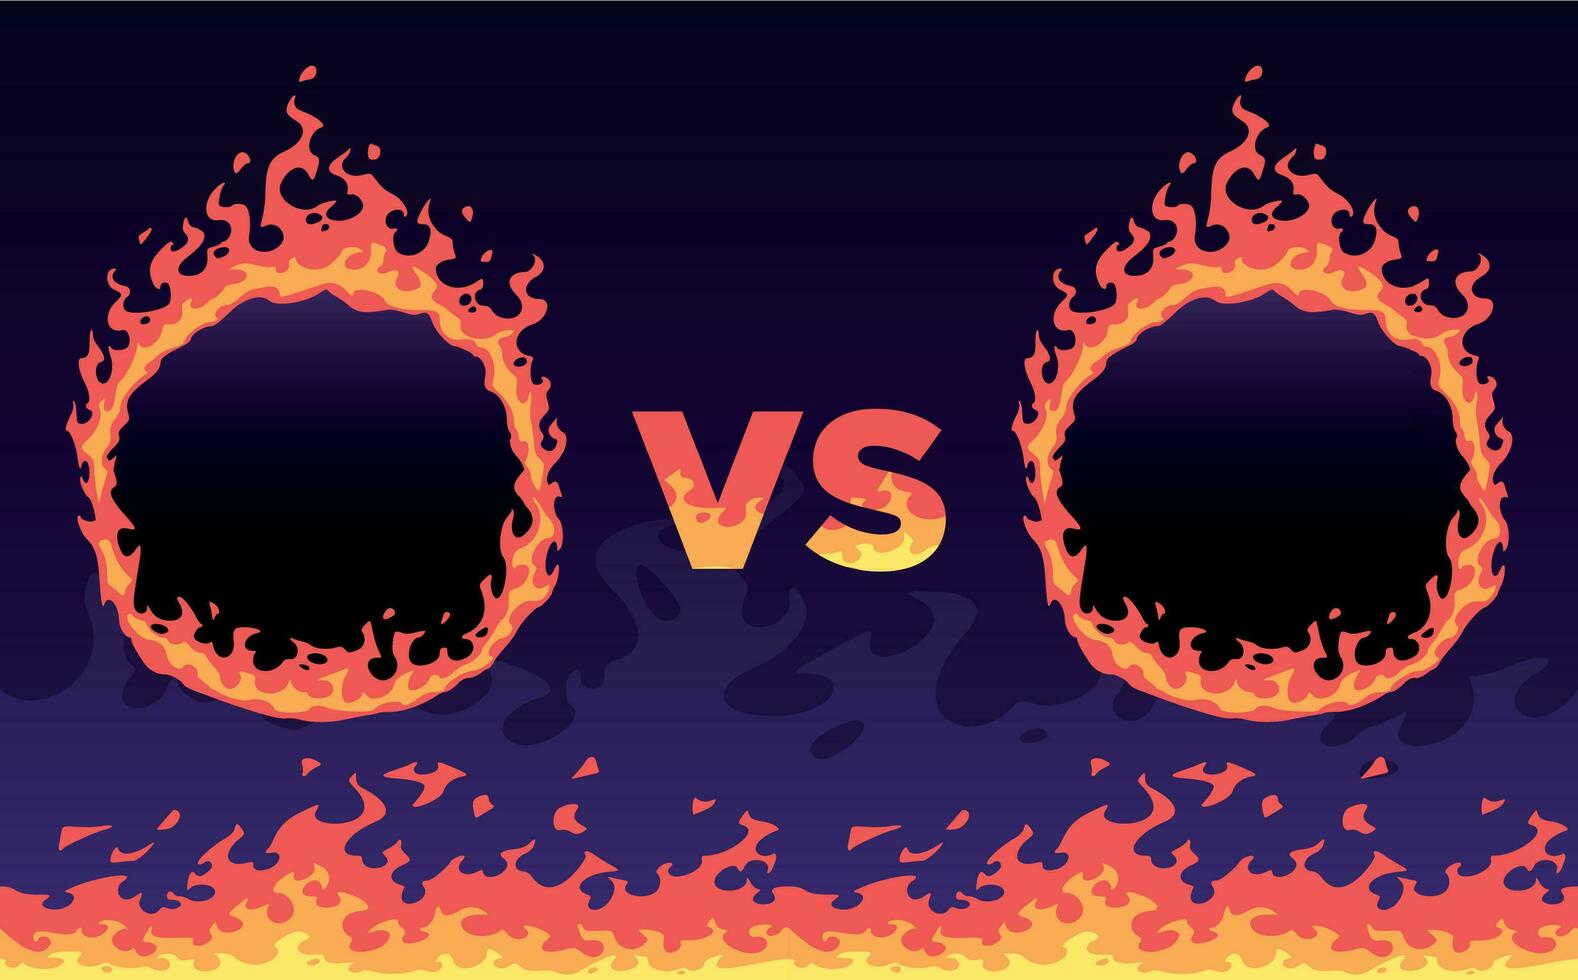 Fire versus frame. Sport challenges battle, flaming VS banner and fire flame frames vector illustration. Competitive confrontation, championship match title screen design with copyspace